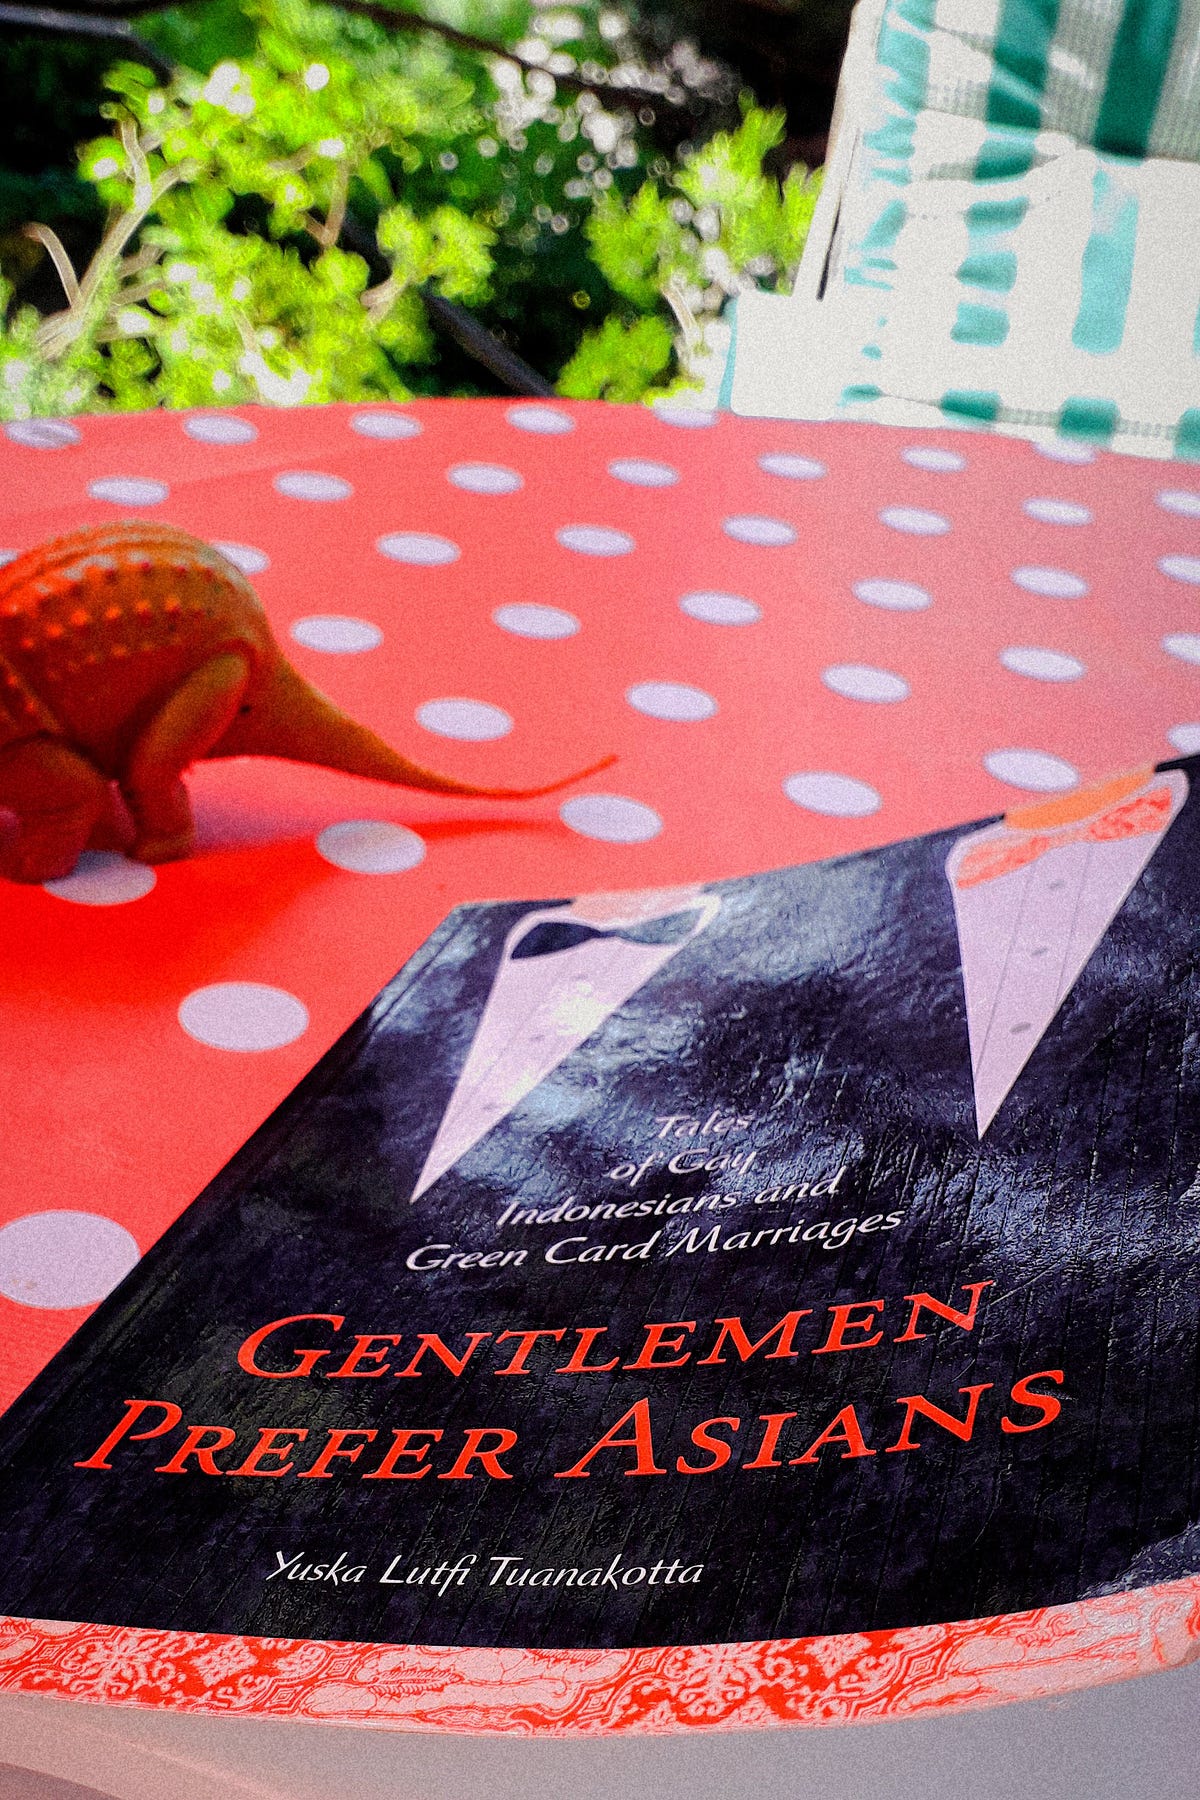 Gentlemen Prefer Asians: Tales of Gay Indonesians and Green Card